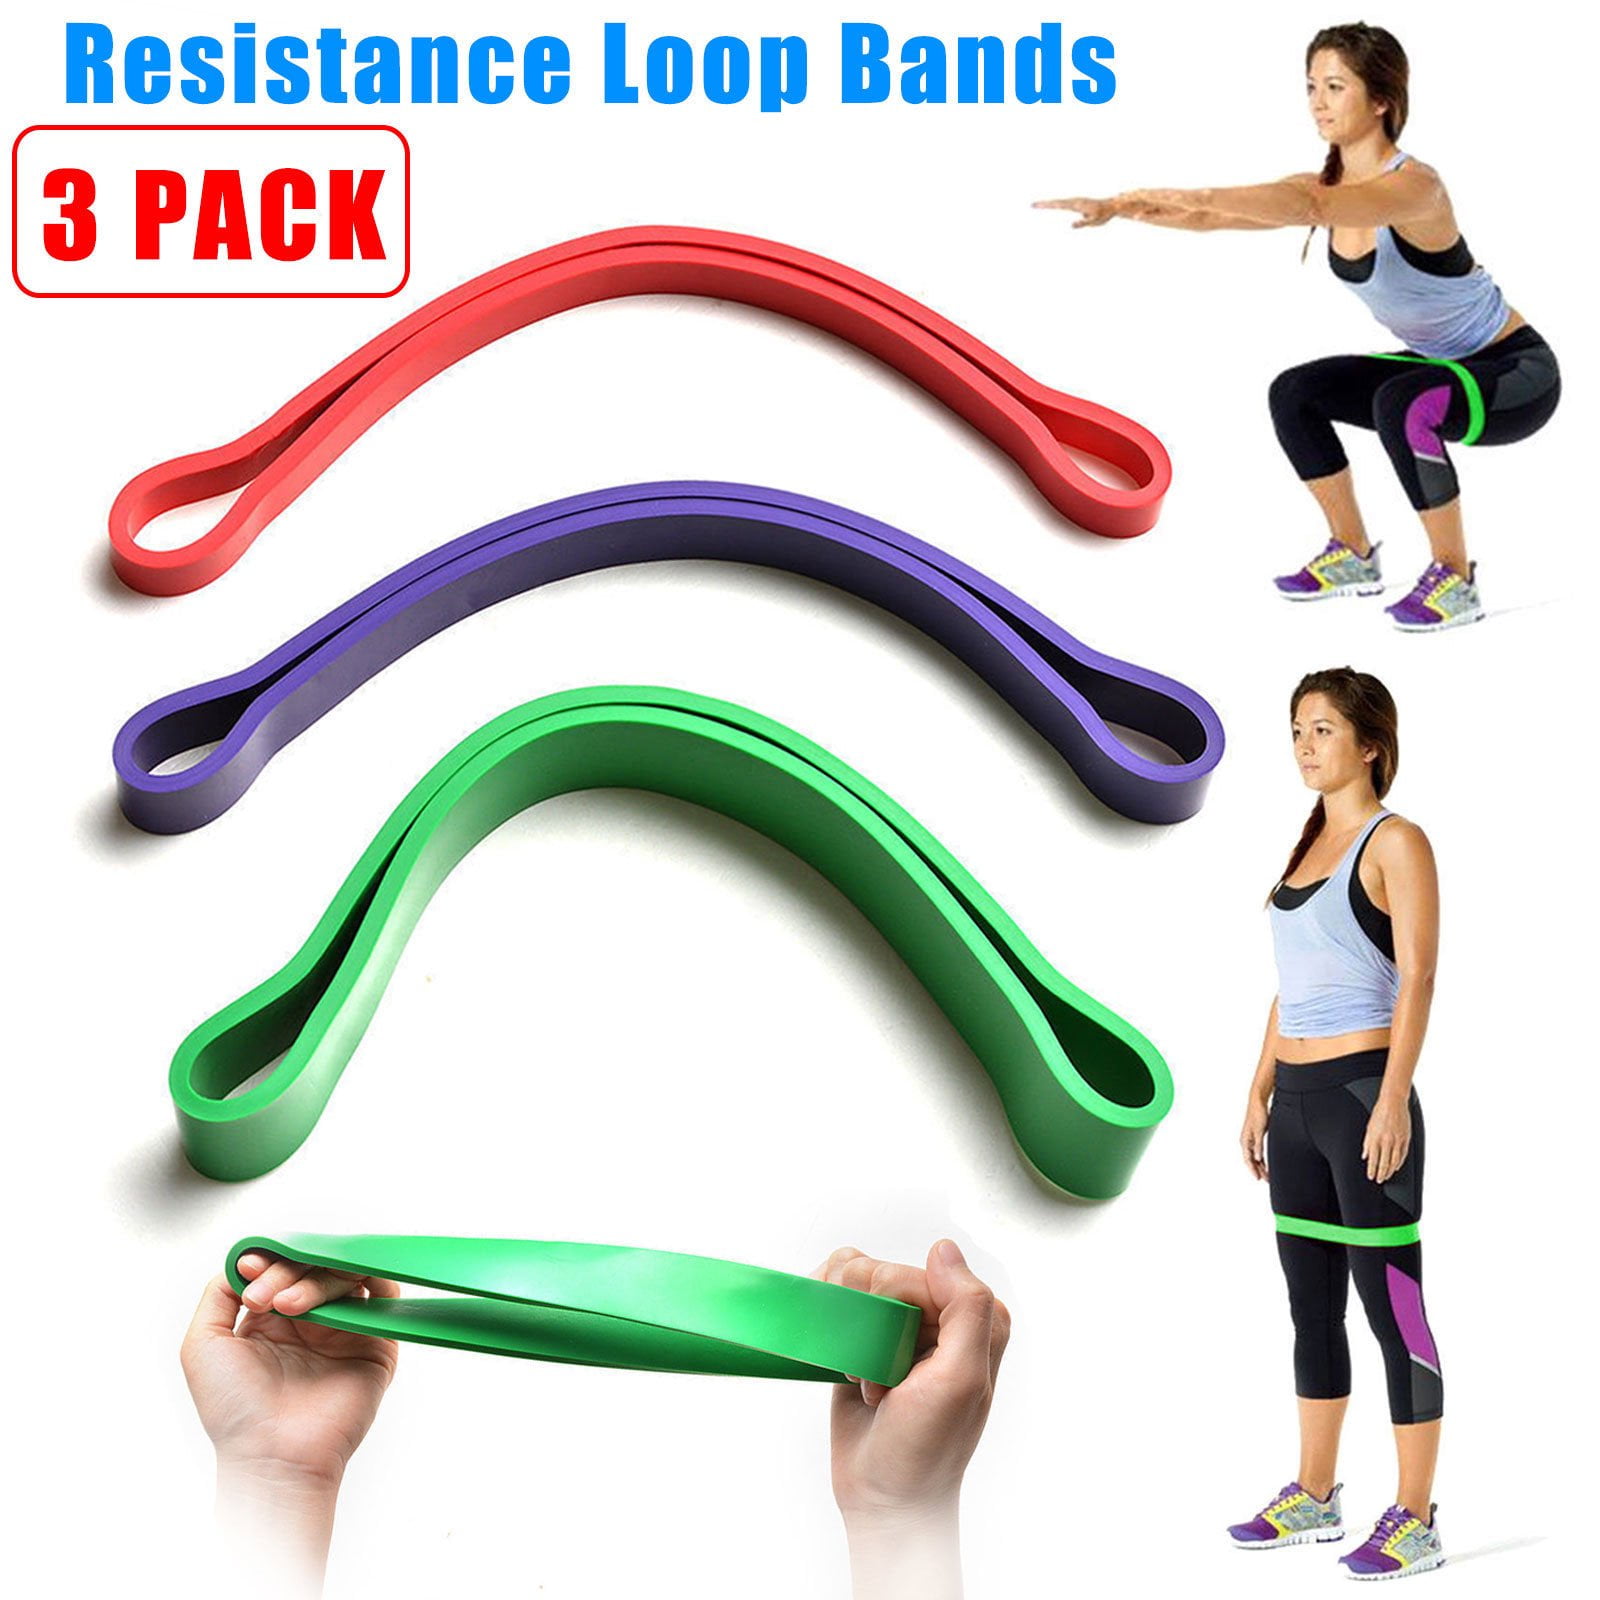 SET OF 4 HEAVY DUTY RESISTANCE BAND LOOP POWER GYM FITNESS EXERCISE YOGA WORKOUT 